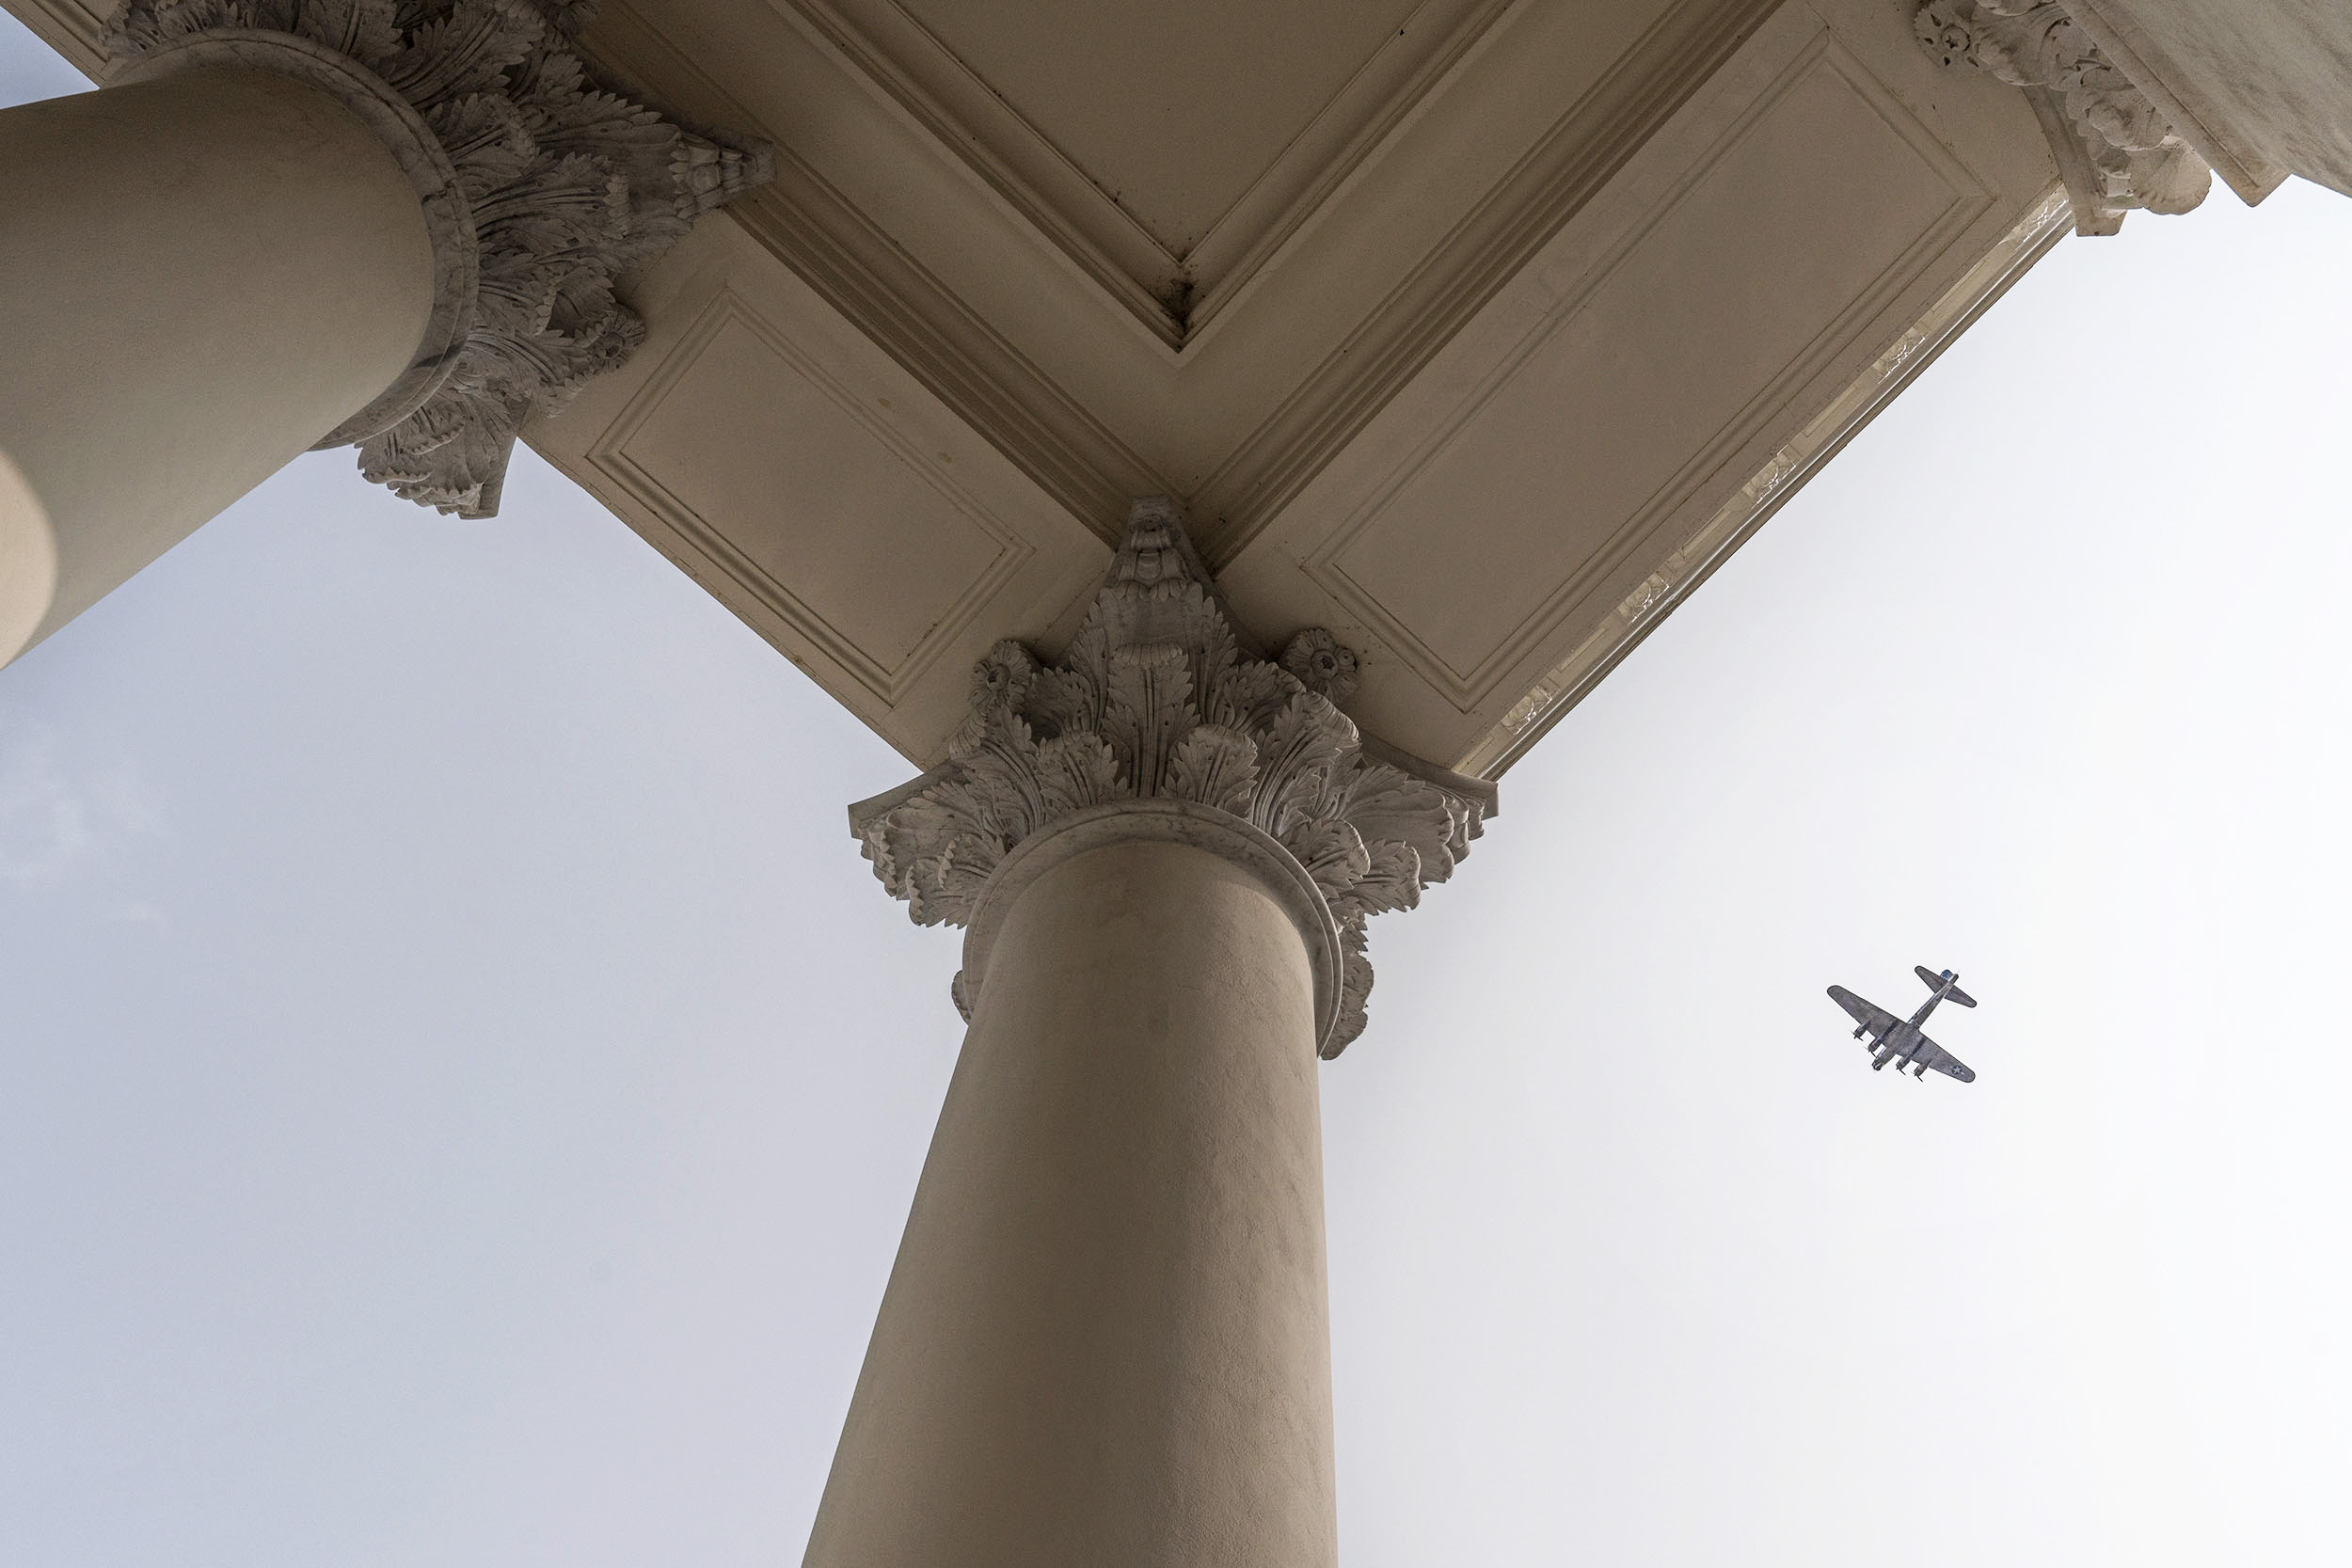 View of the Columns at the Rotunda with a plane flying